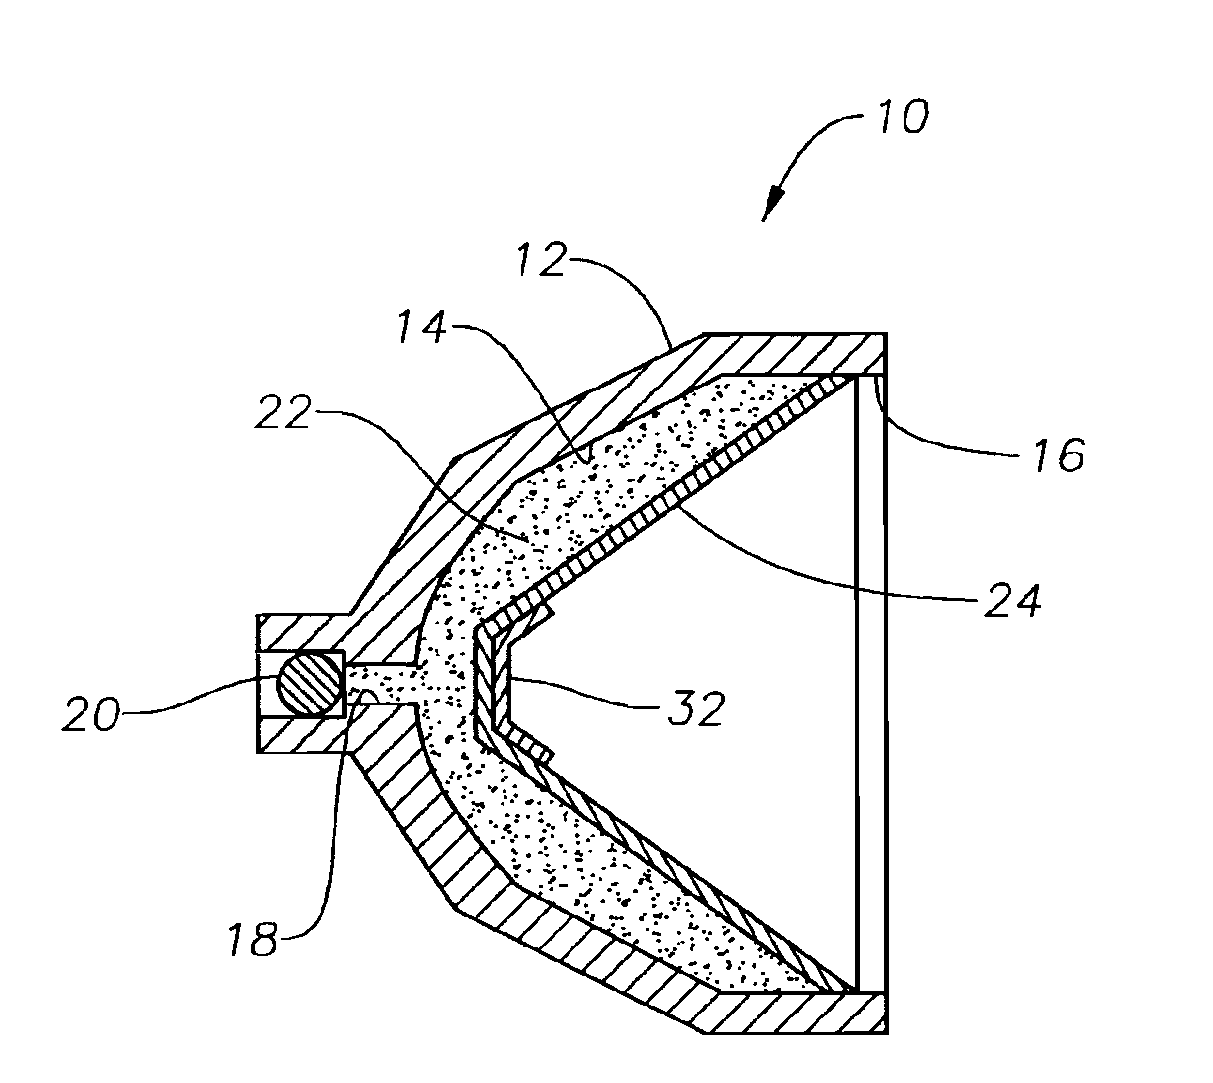 Apparatus and Method for Penetrating Oilbearing Sandy Formations, Reducing Skin Damage and Reducing Hydrocarbon Viscosity